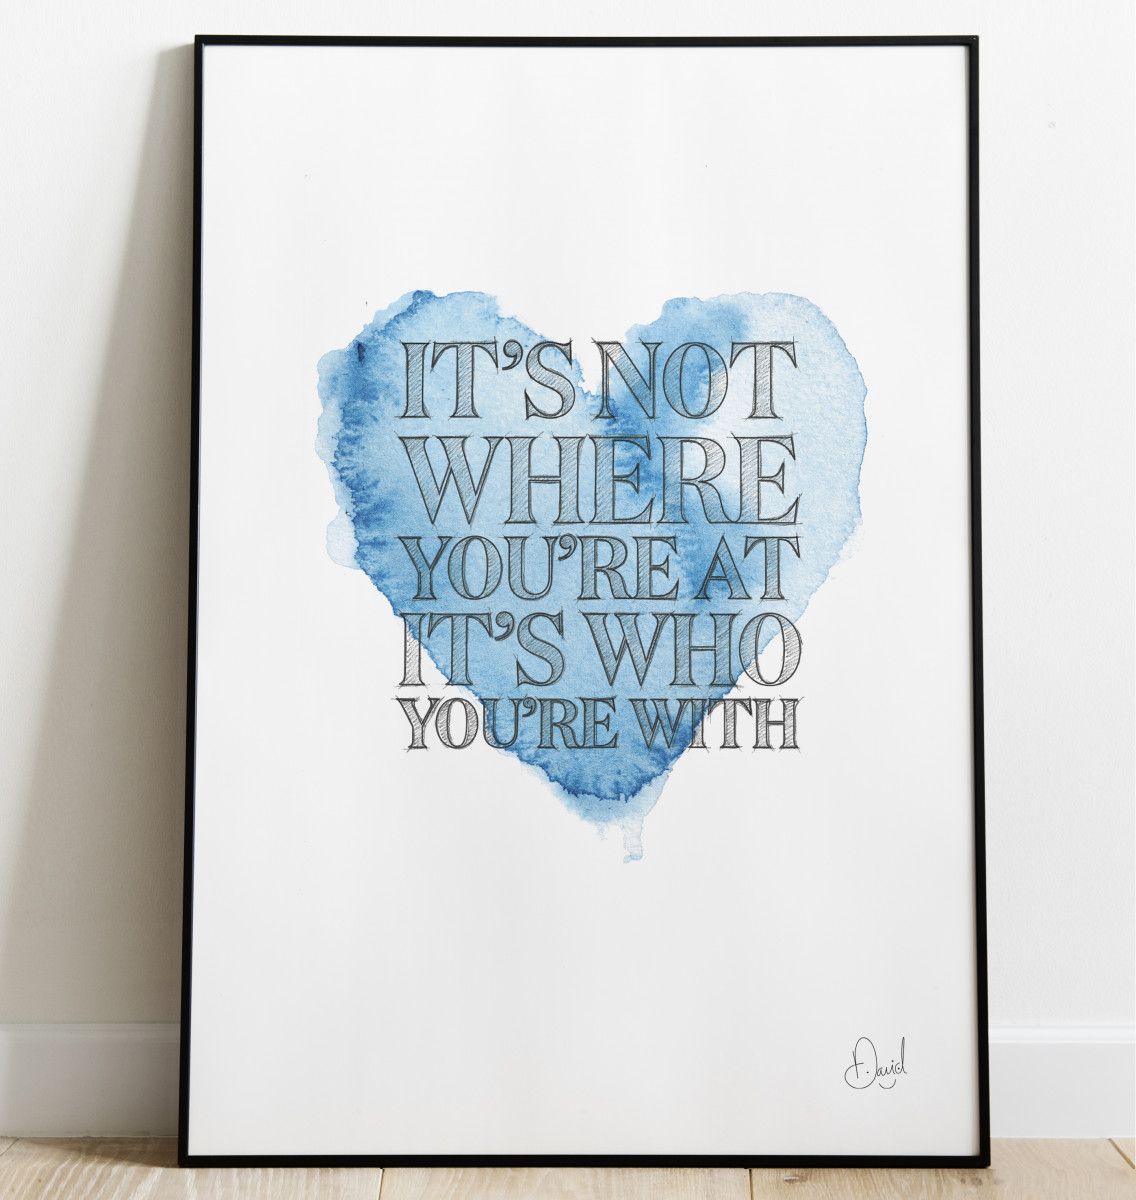 It's not where you're at - Typographic art print